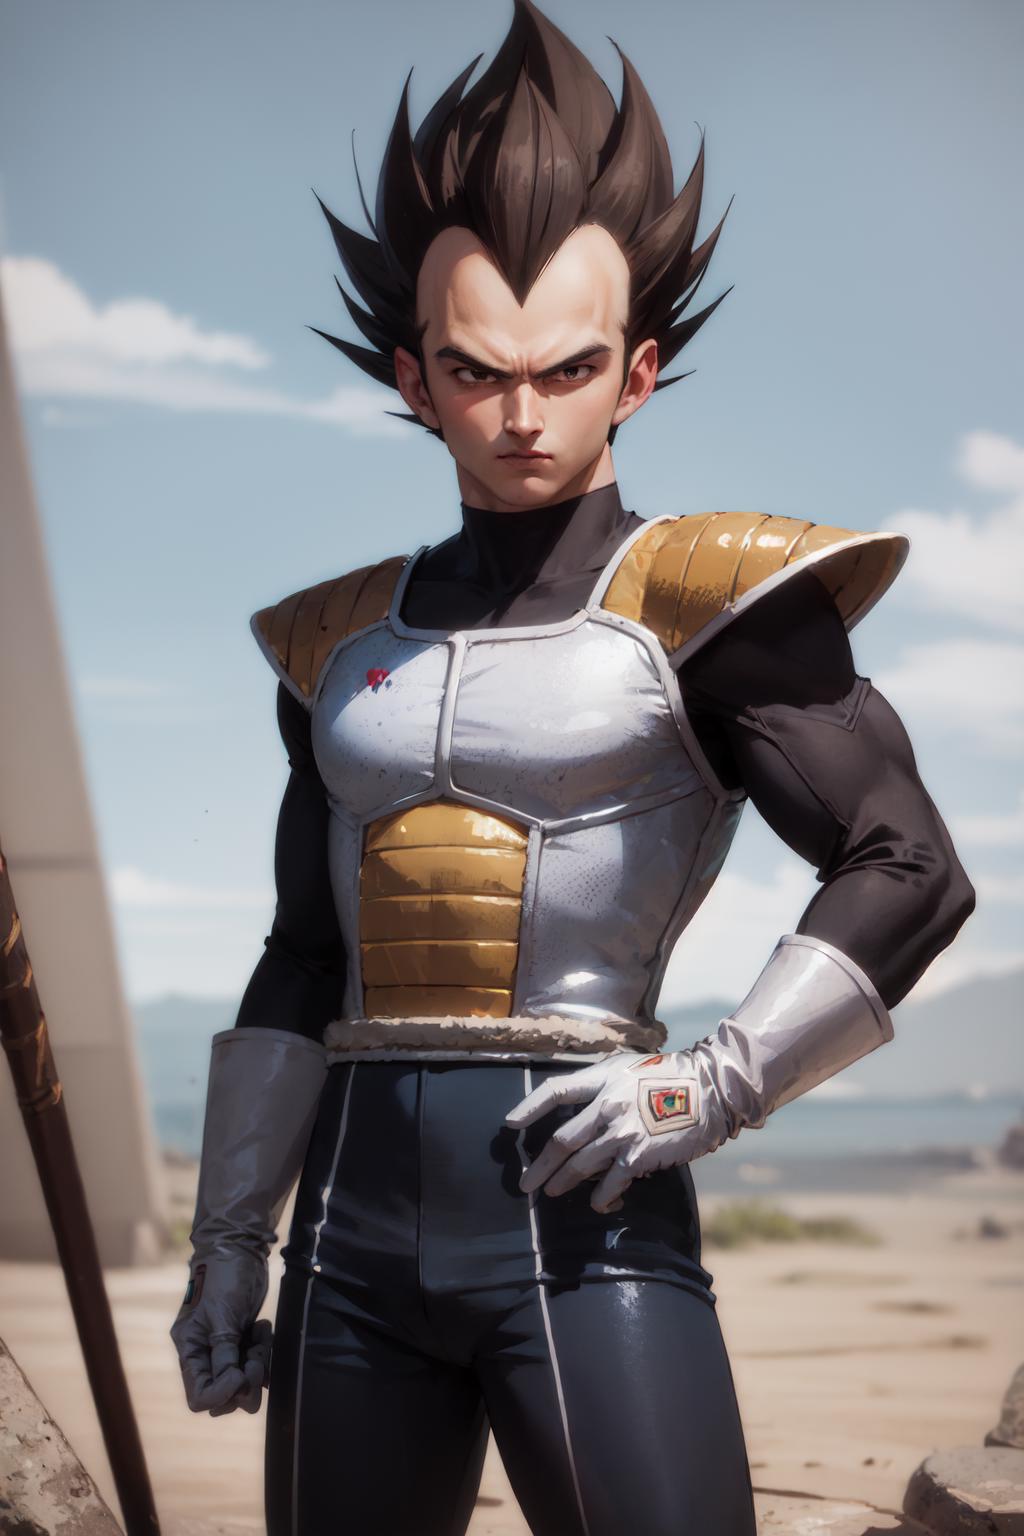 Anime-style character with spiked hair and a muscular build.